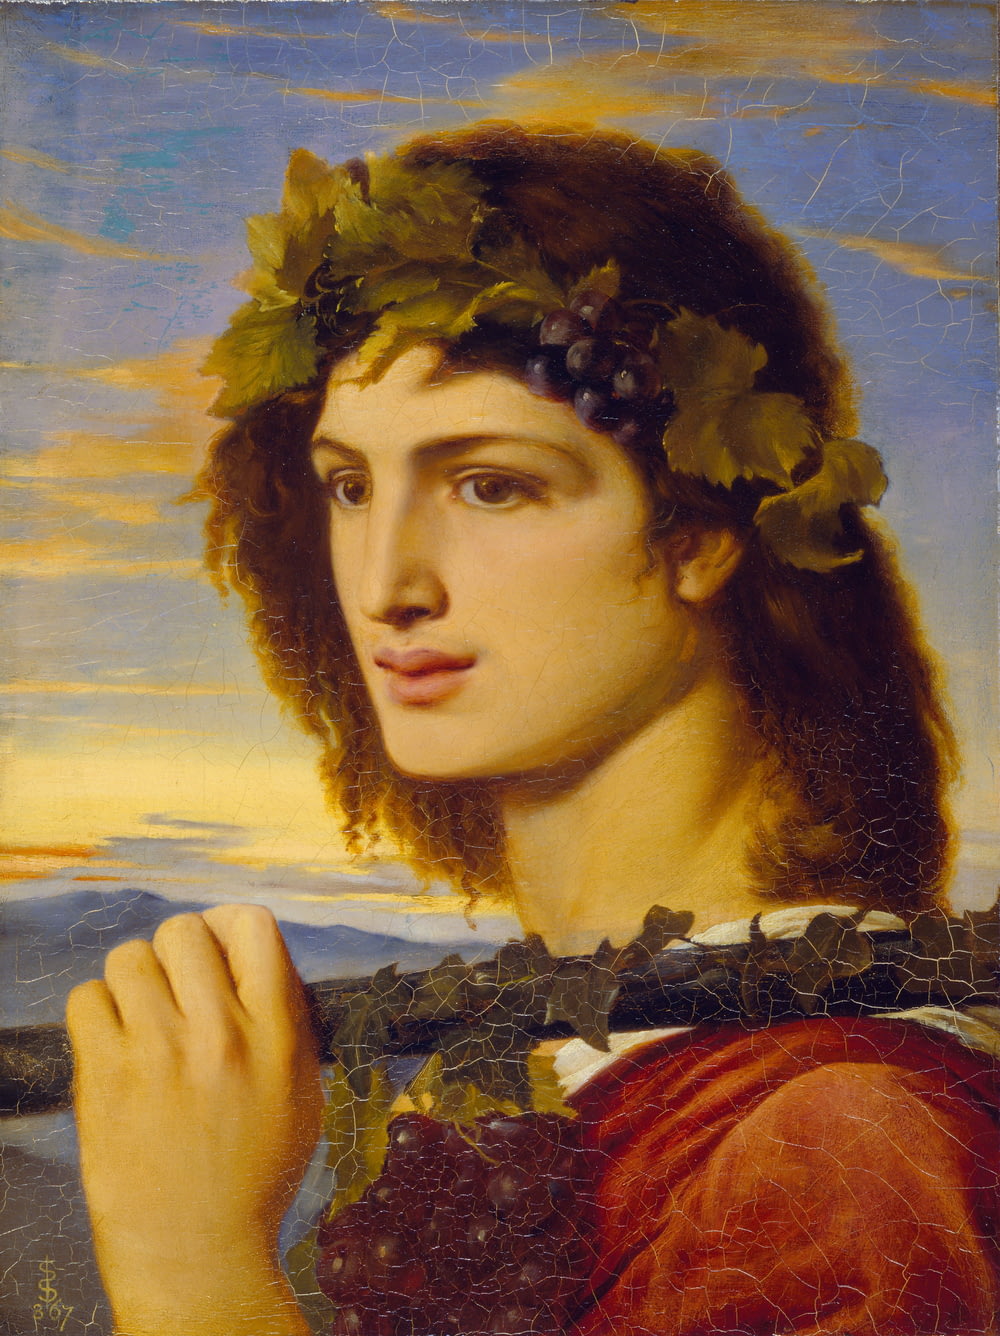 a painting of a woman with a wreath of grapes on her head